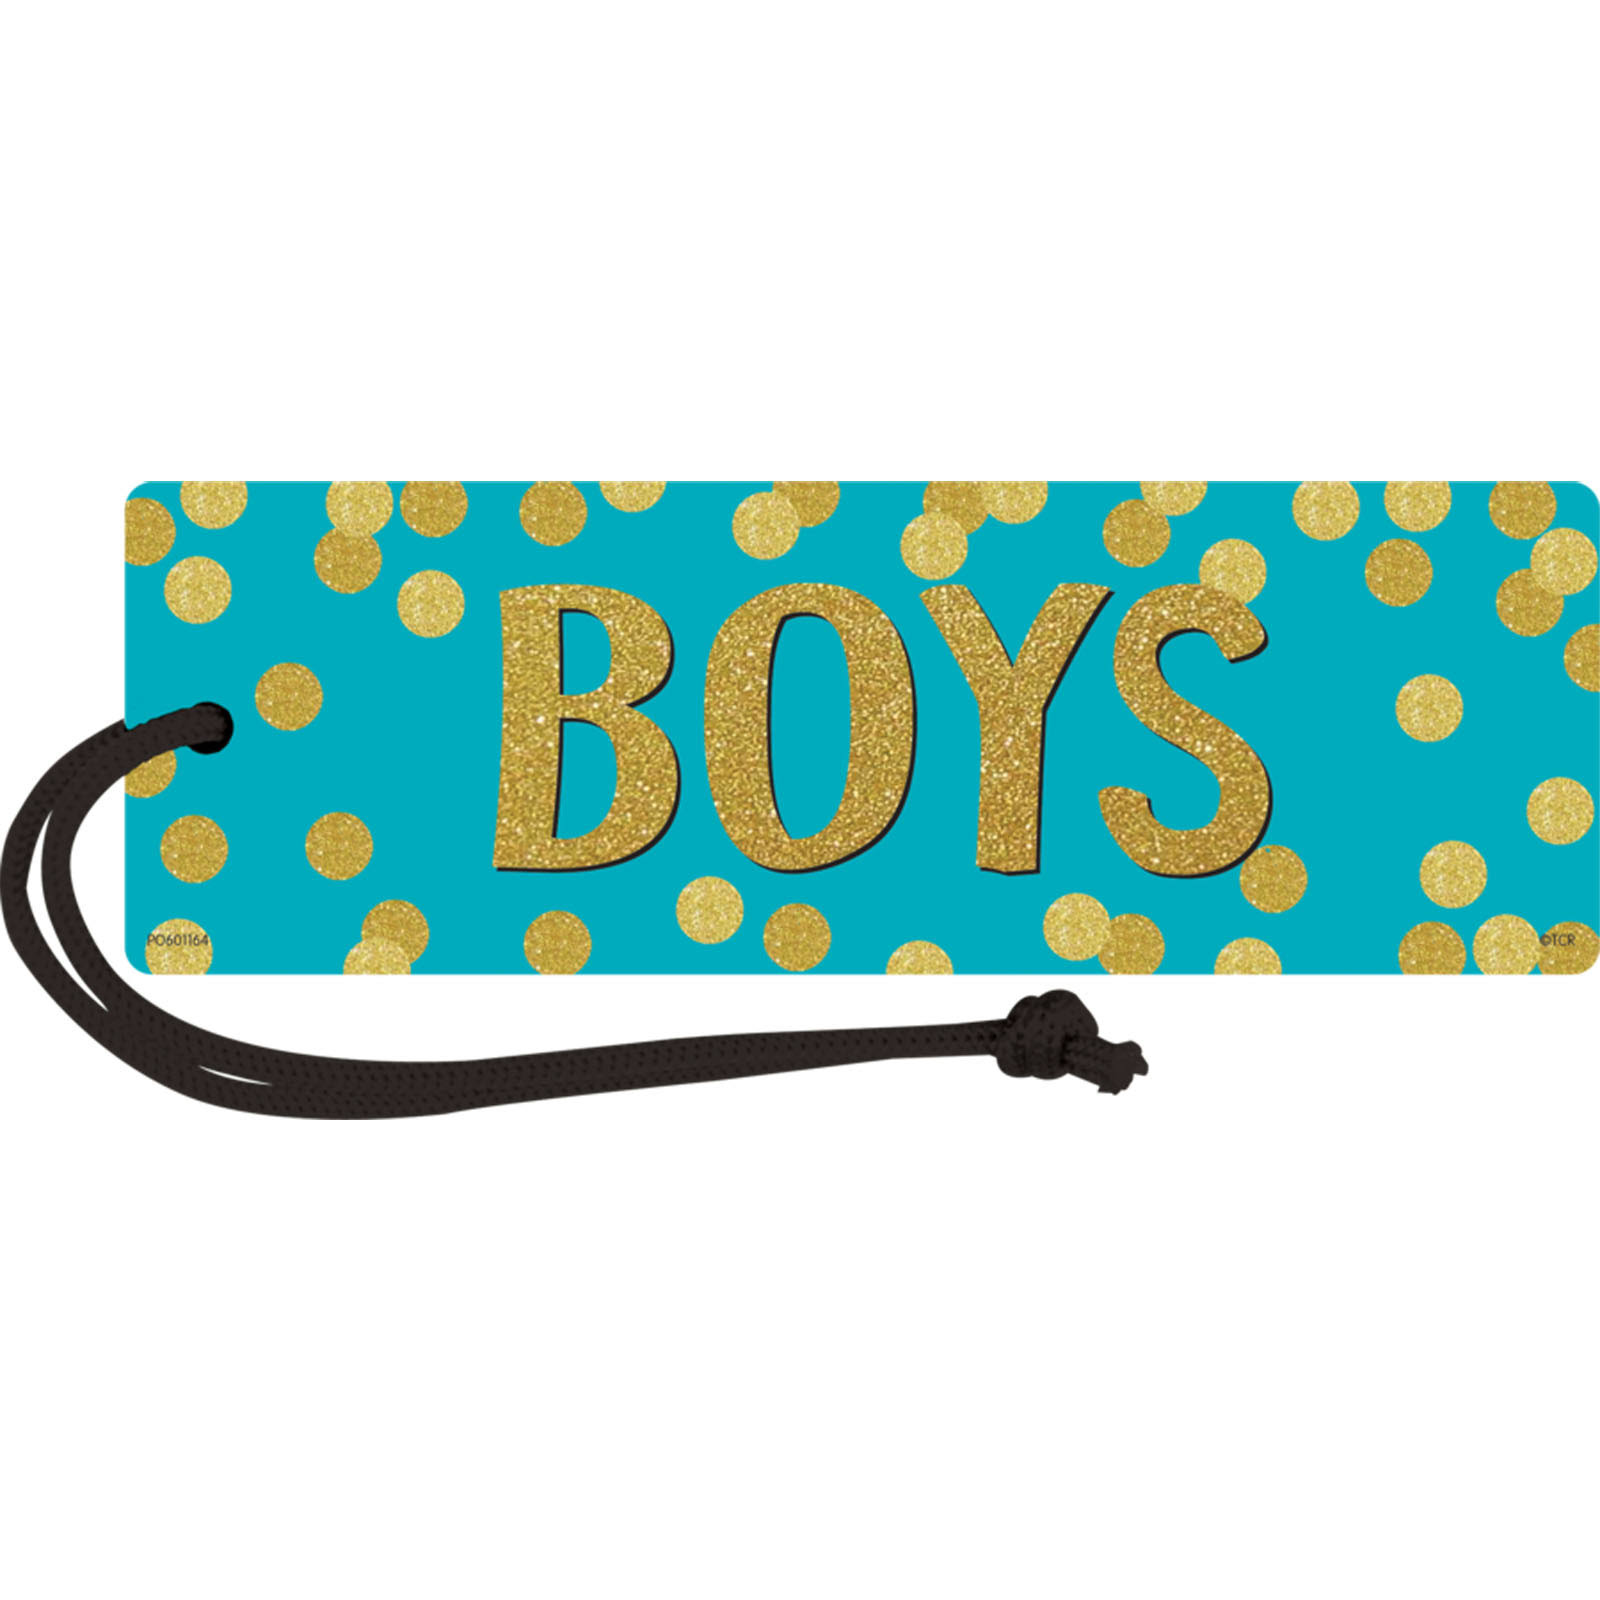 Teacher Created Resources TCR77395 6.75 x 2.25 in. Confetti Magnetic Boys Pass